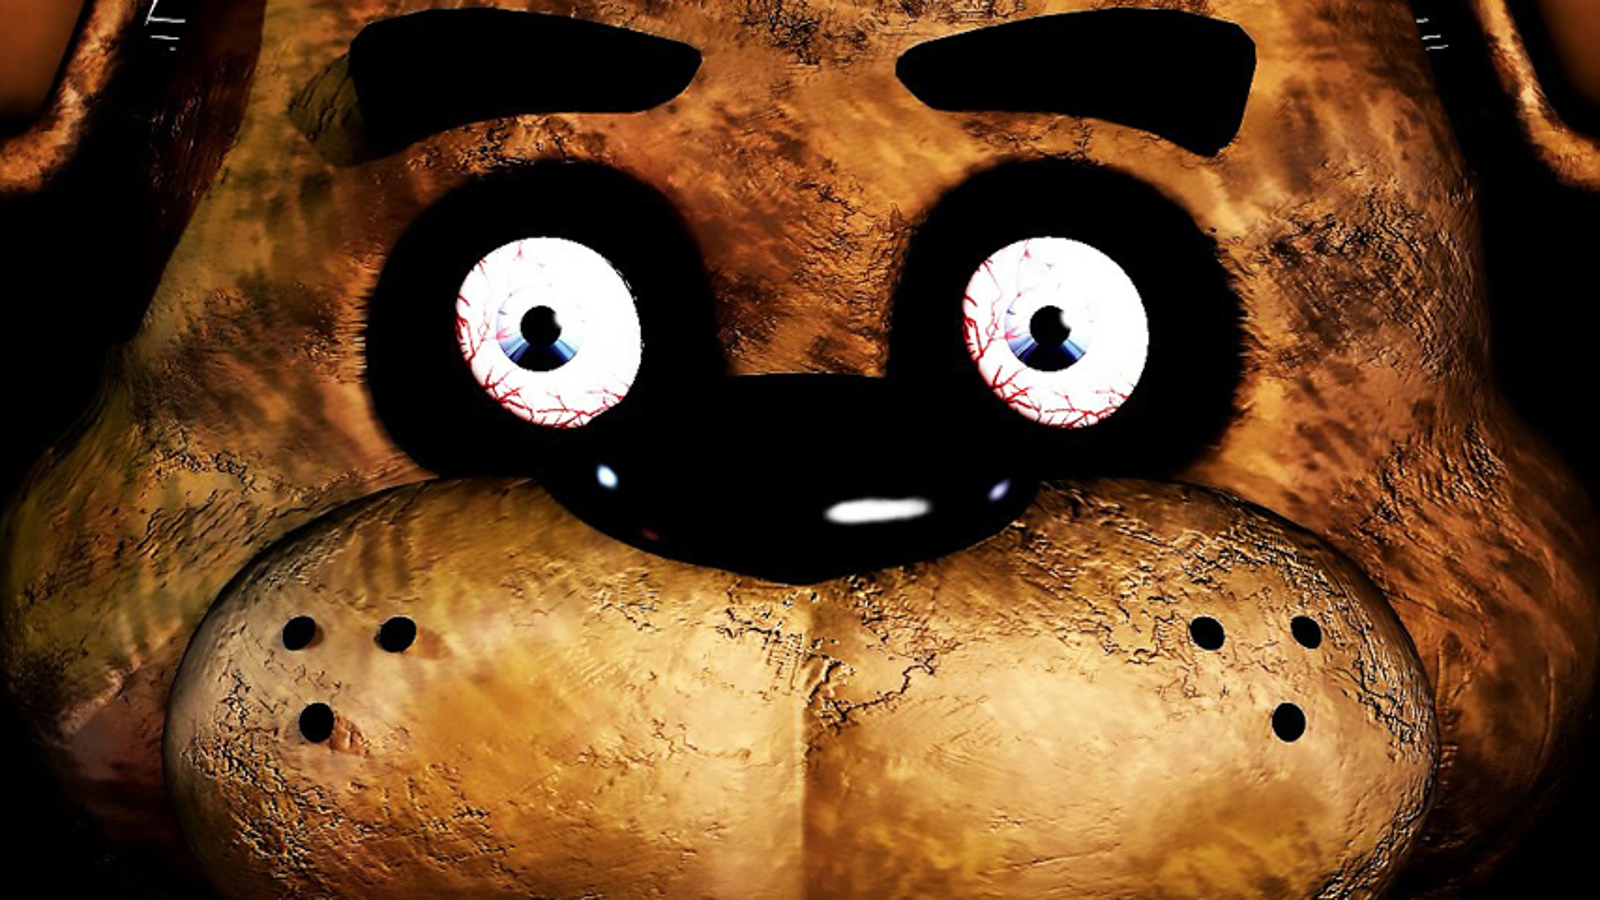 Warner Bros. picks up film rights to 'Five Nights at Freddy's' video game